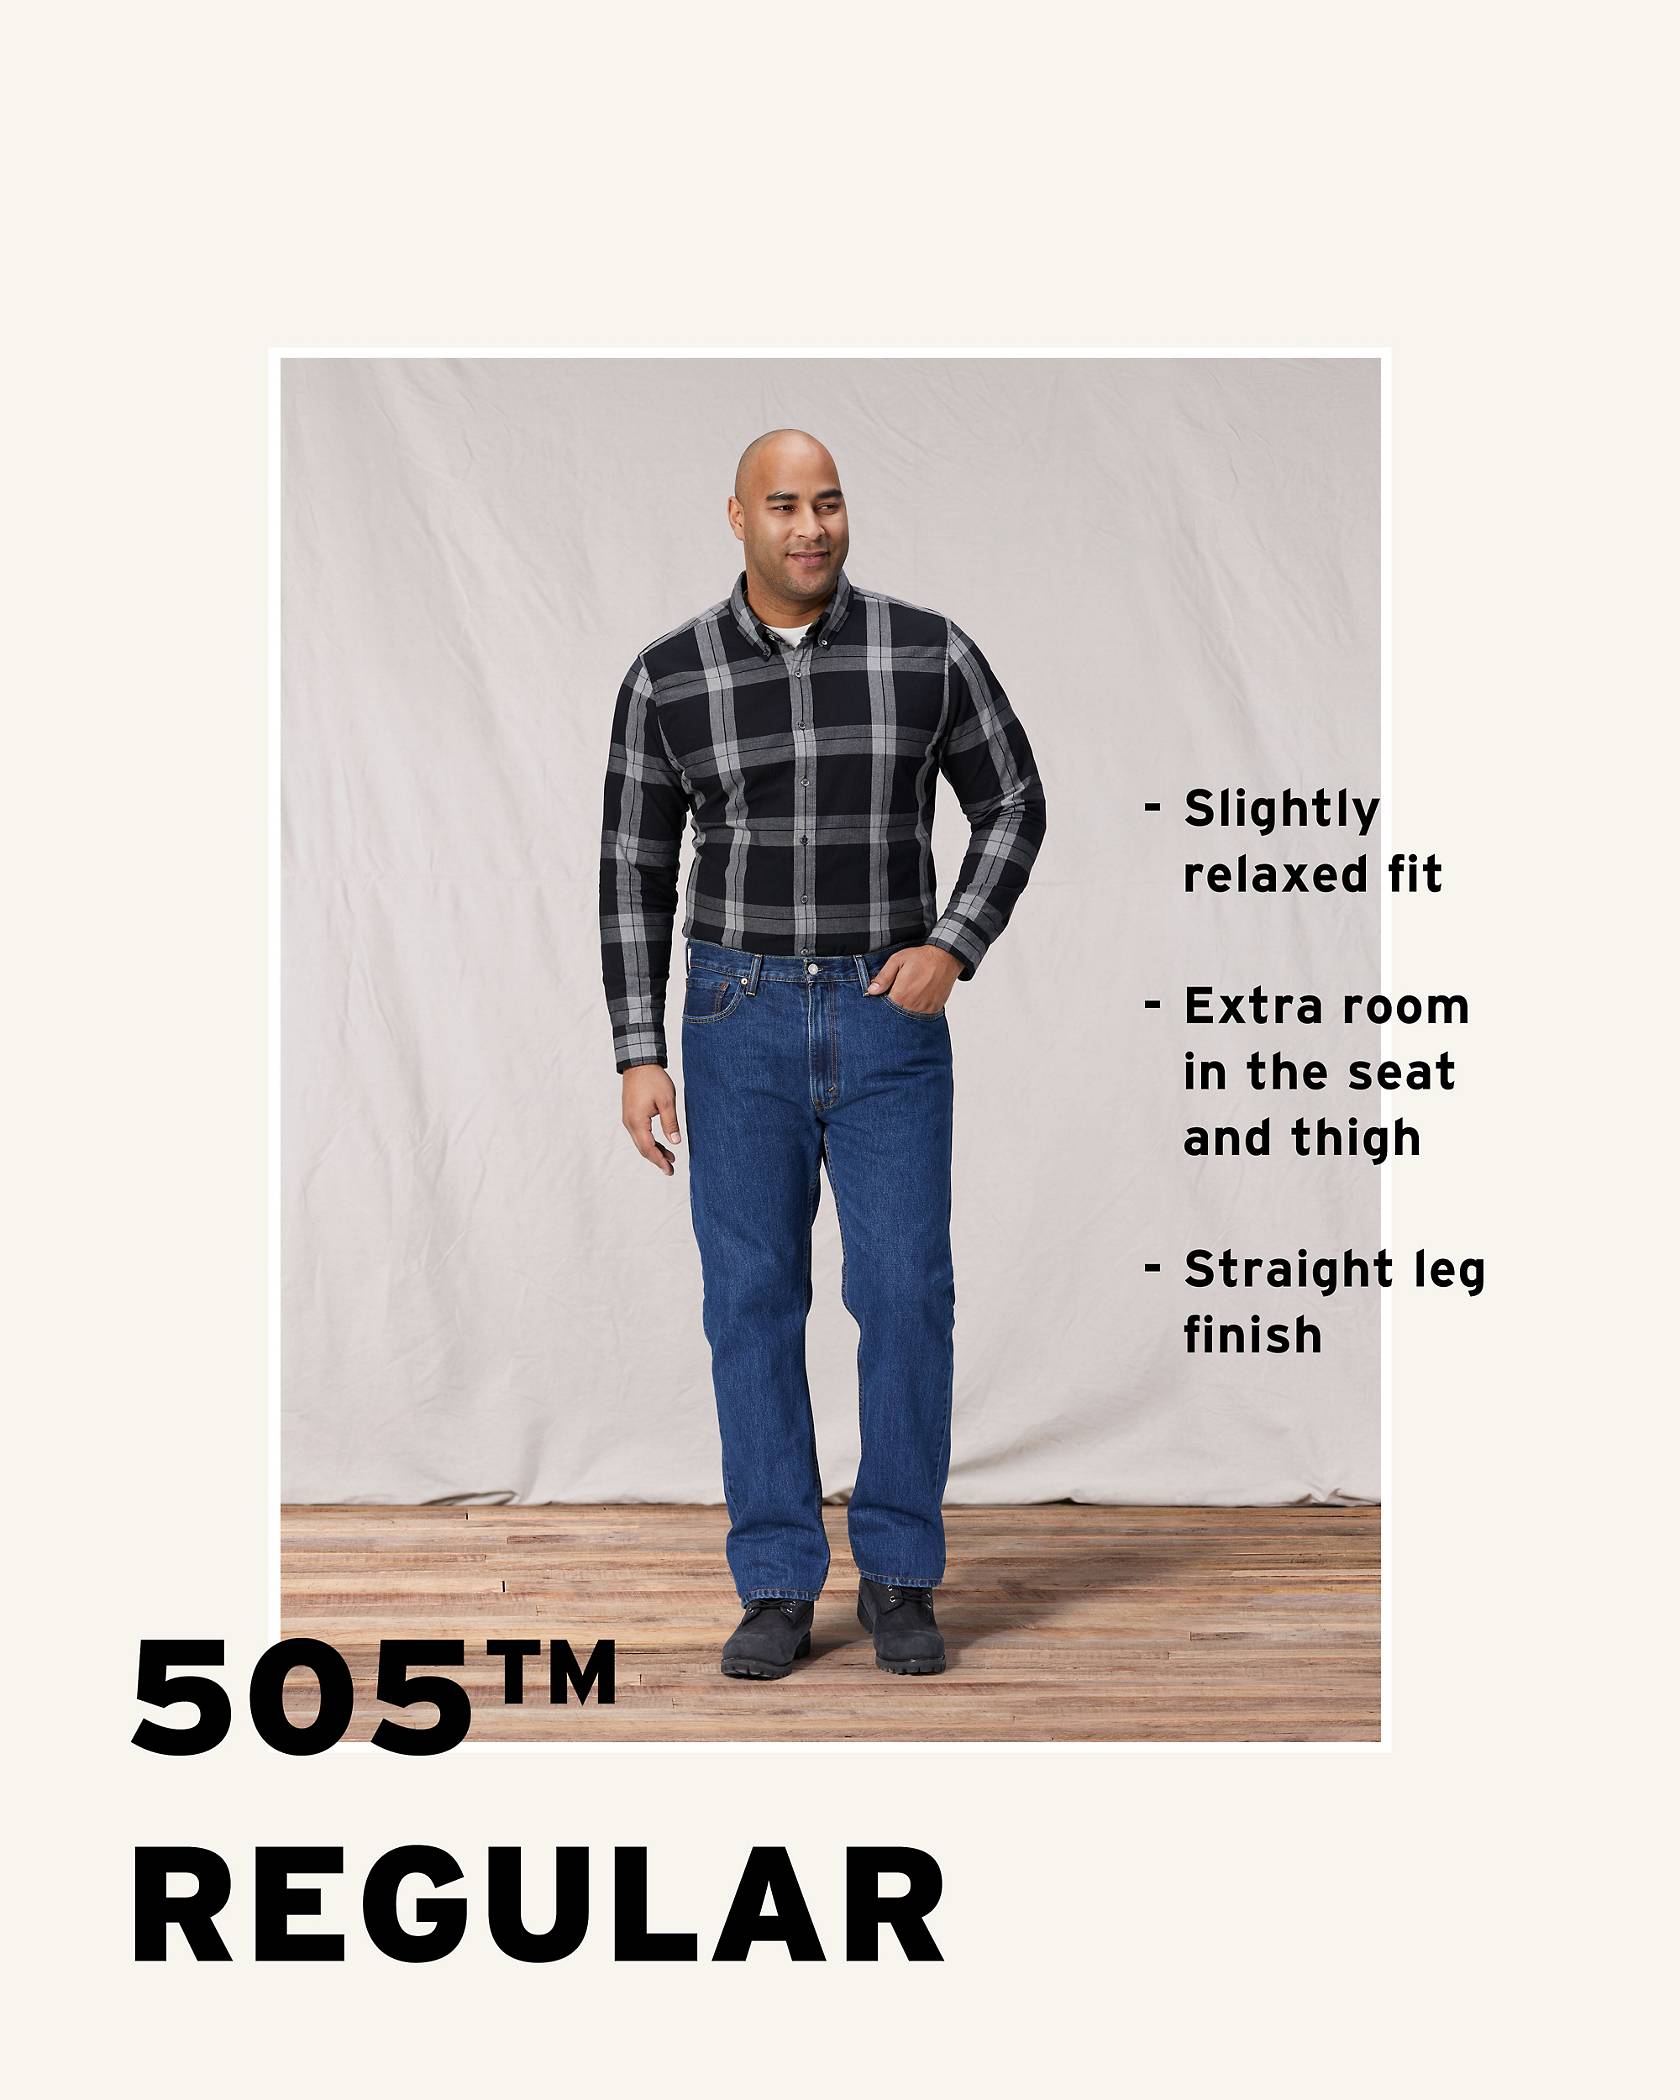 Model wearing a black and grey plaid shirt, 505™ Regular medium wash jeans, and black shoes while his left hand is in his left front pocket.